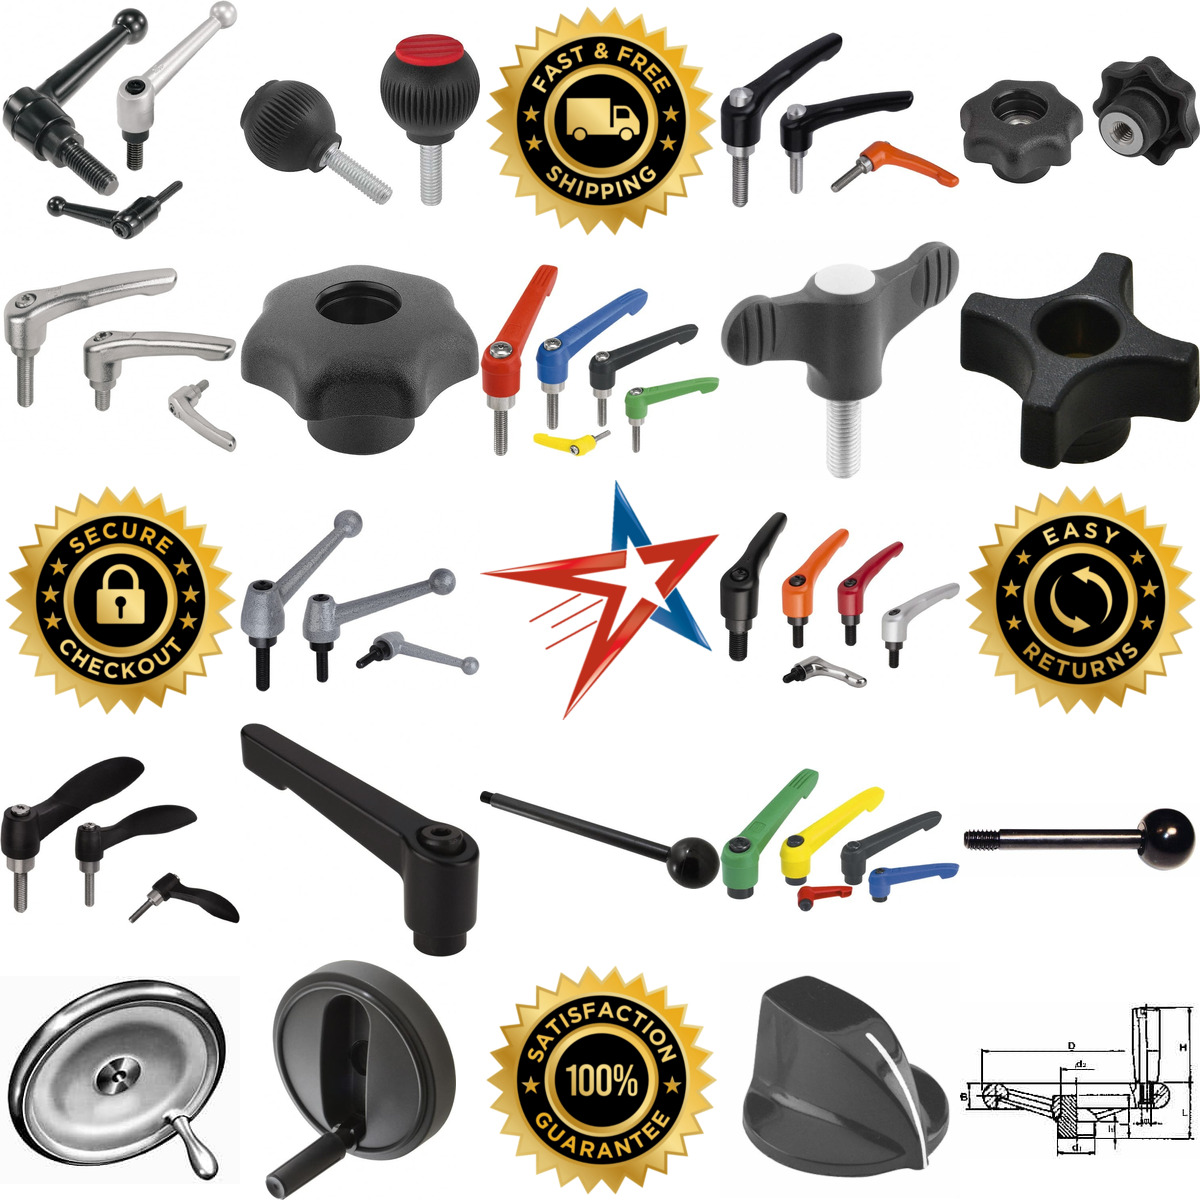 A selection of Handwheels Levers Handles and Knobs products on GoVets